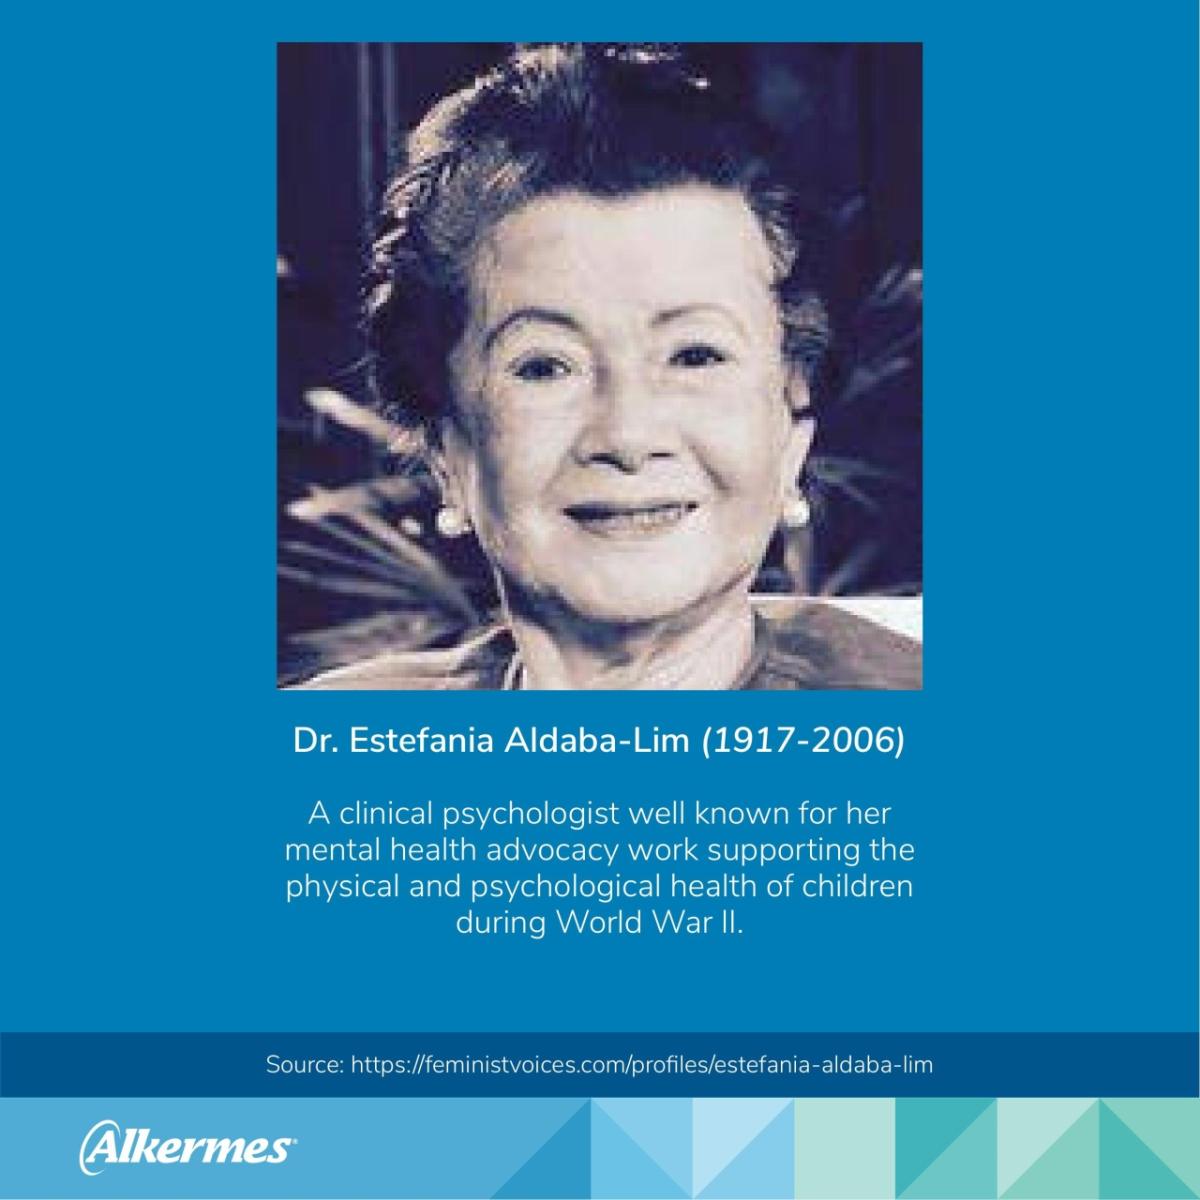 Dr. Estefania Aldaba-Lim (1917-2006) A clinical psychologist well known for her mental health advocacy work supporting the physical and psychological health of children during World War II. Source: https://feministvoices.com/profiles/estefania-aldaba-lim